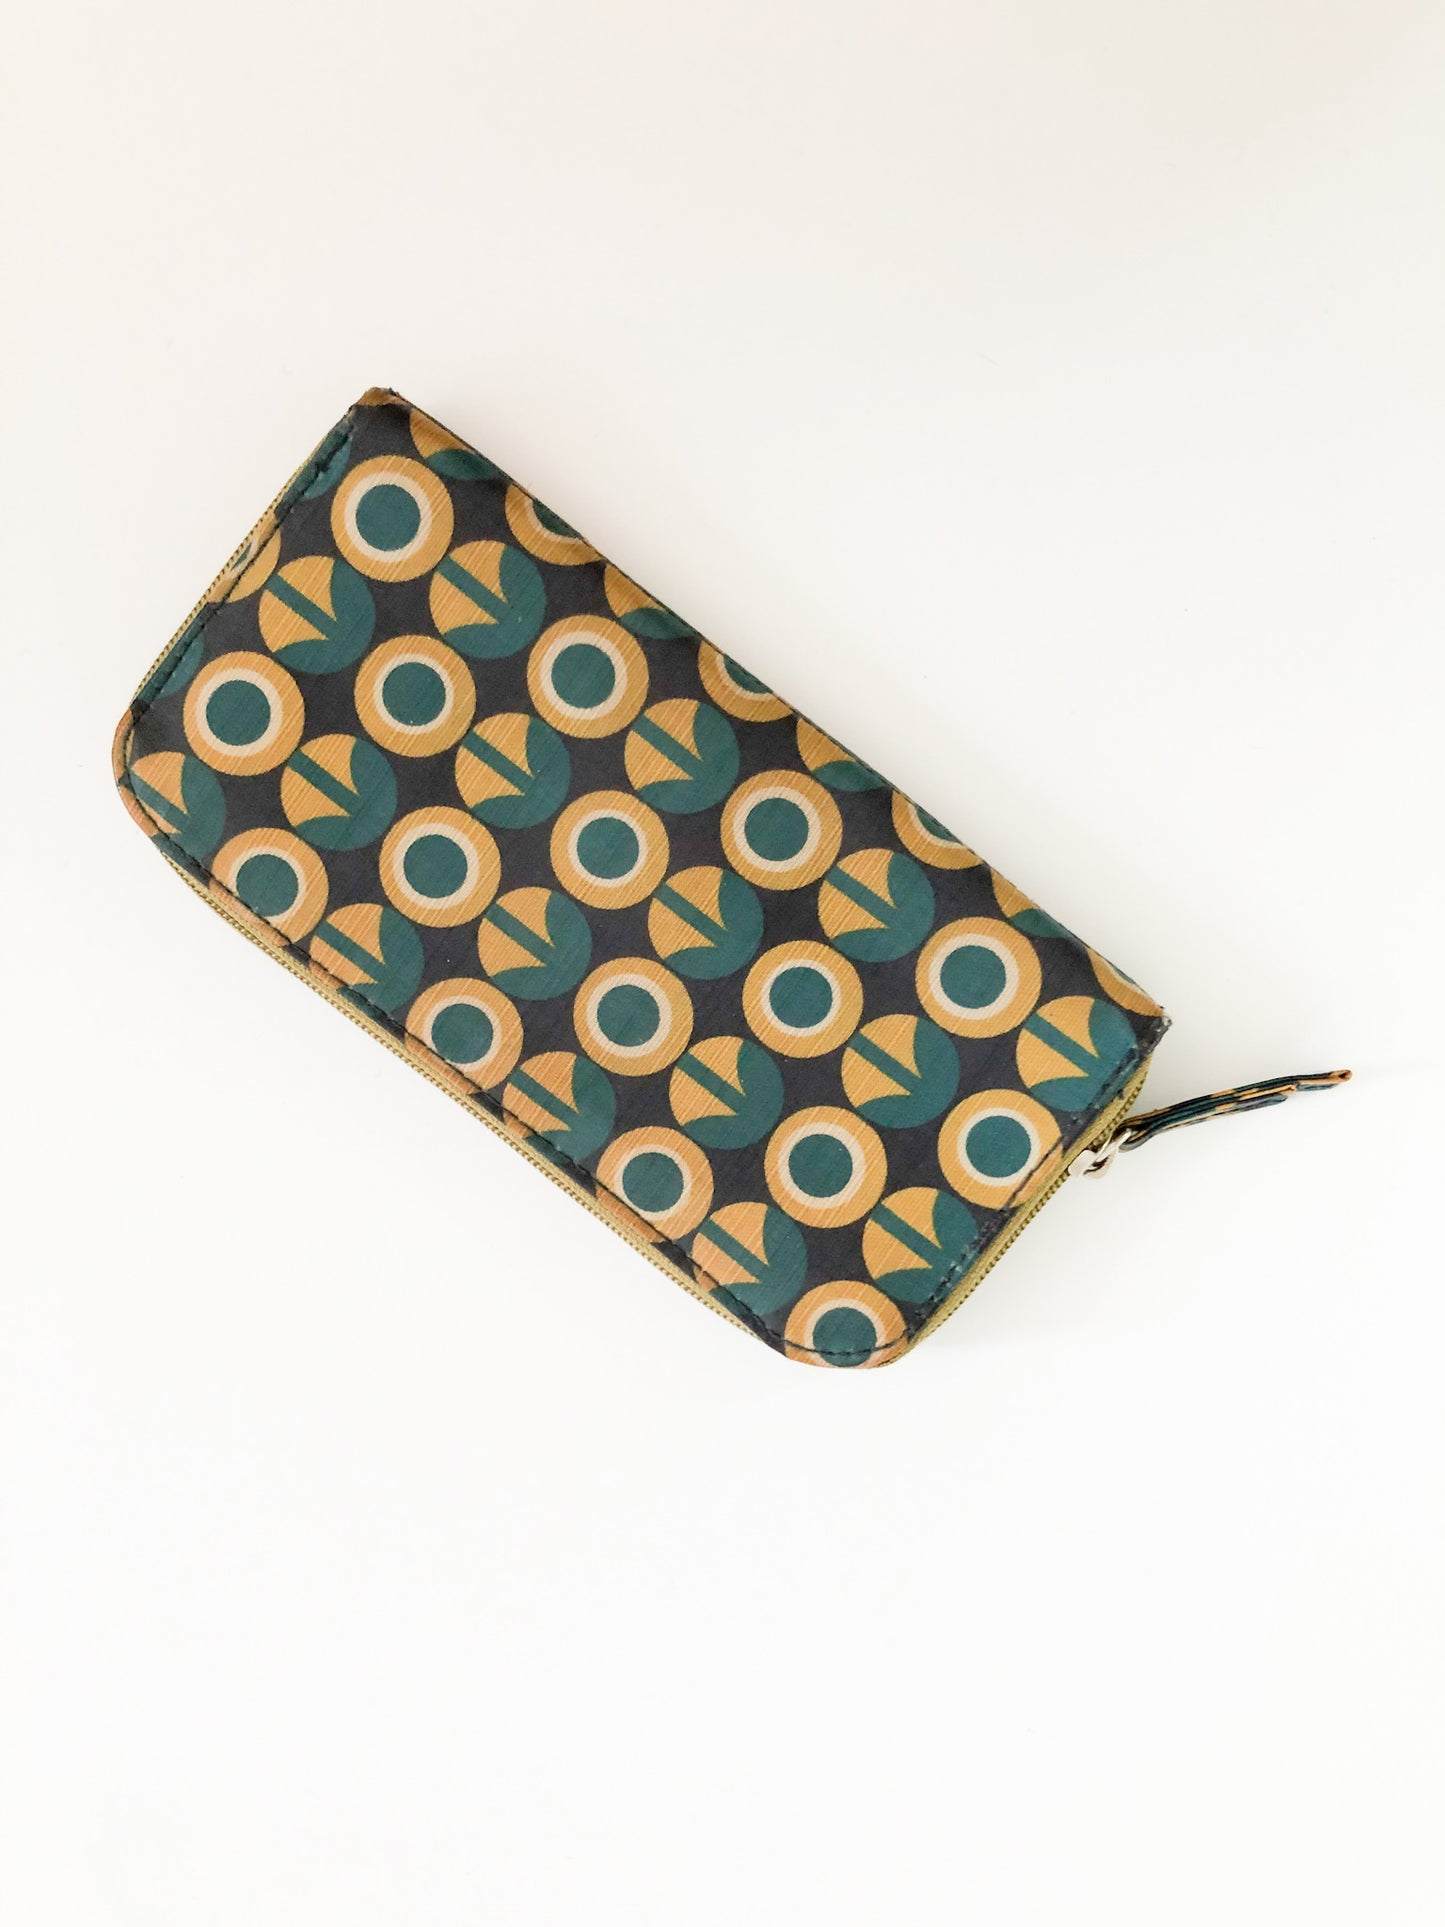 Mono Amsterdam Teal and Mustard Graphic Wallet